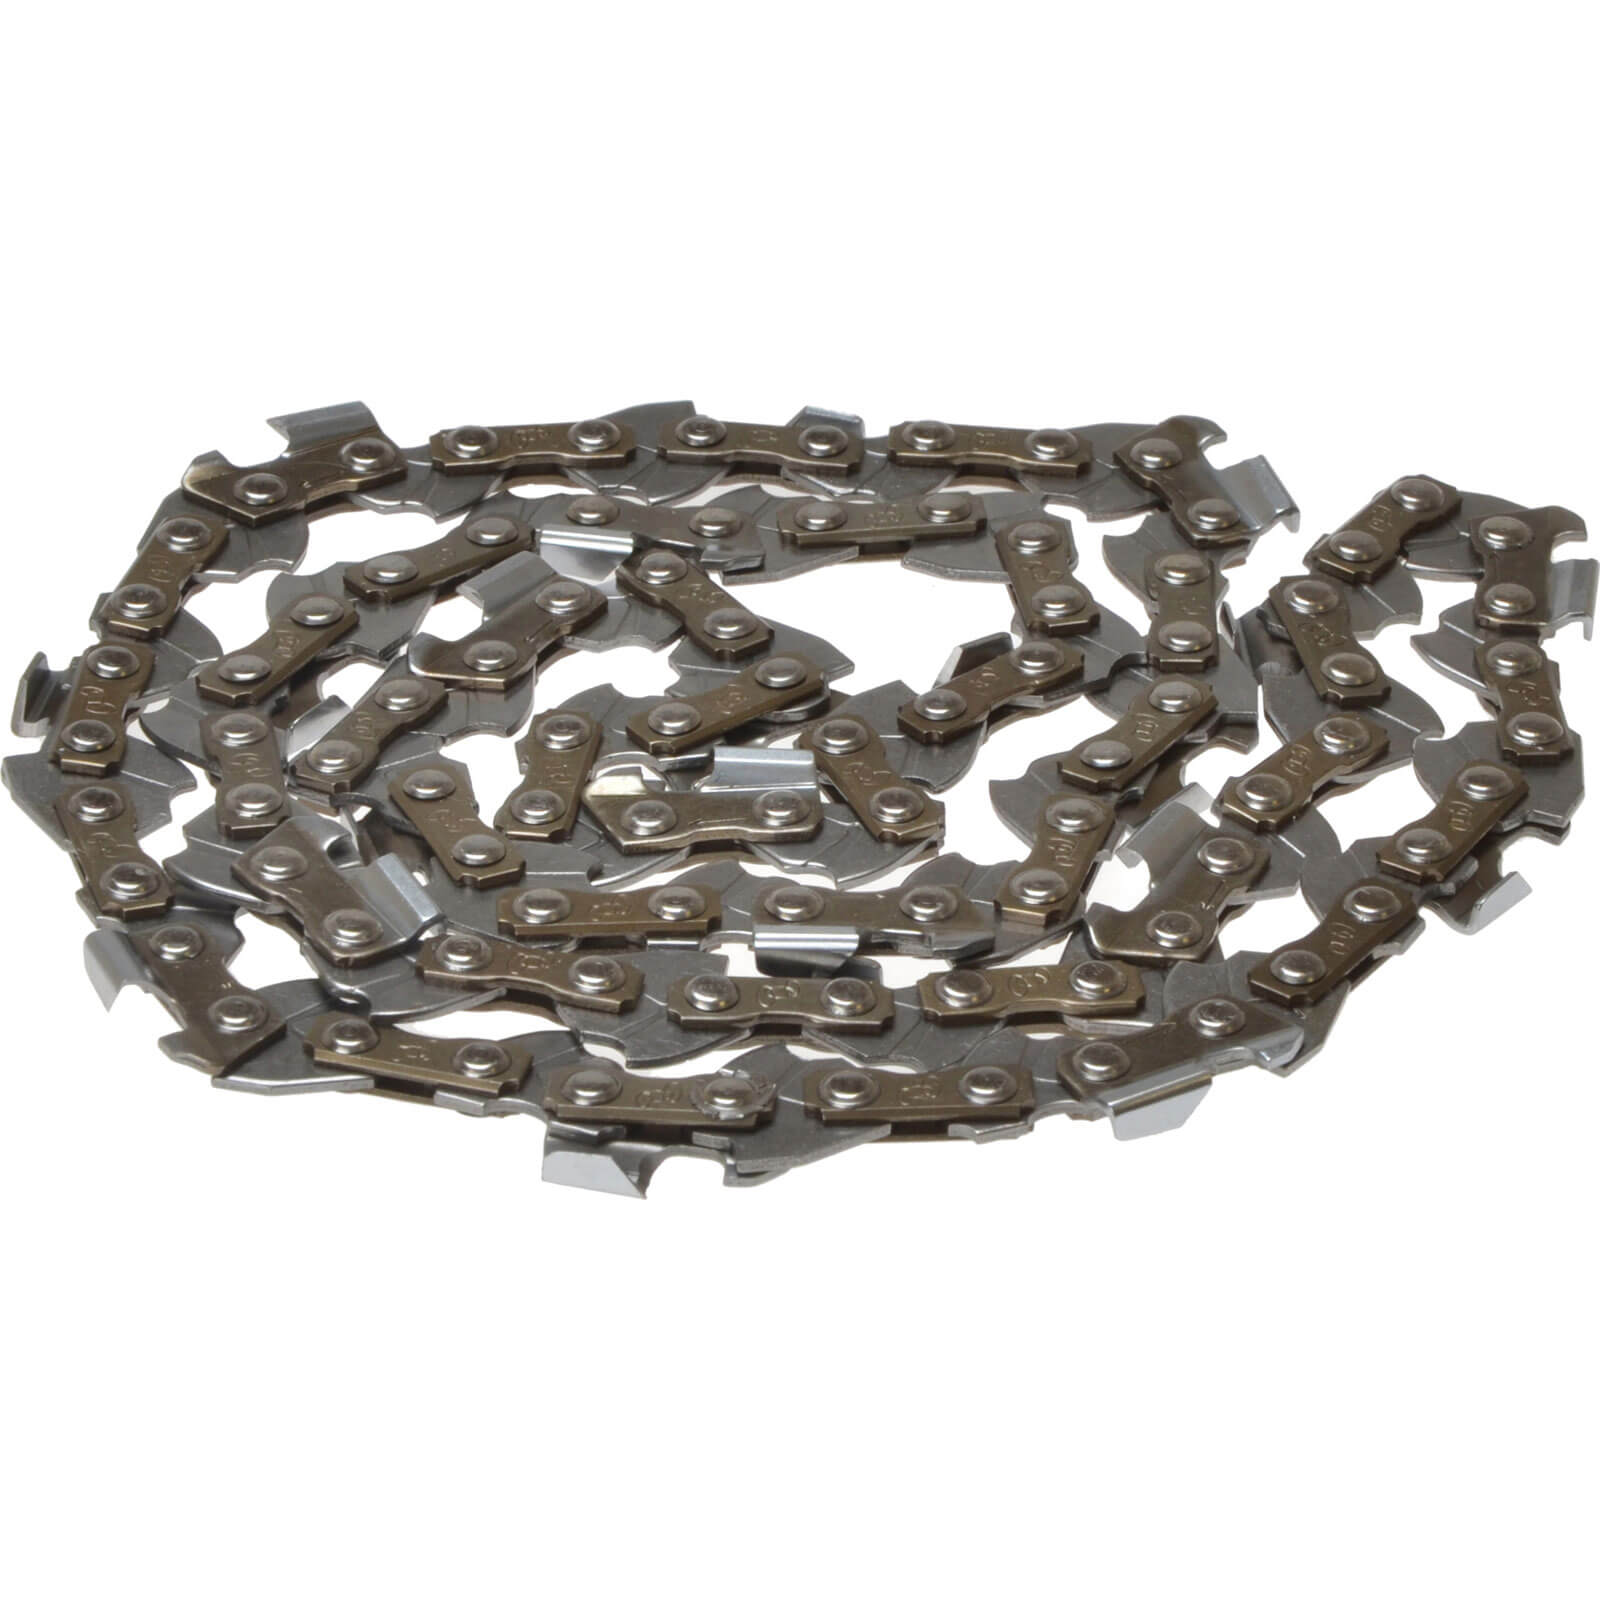 ALM Replacement Chainsaw Chain 3/8&quot x 45 Links Fits Bosch 30cm Chainsaws